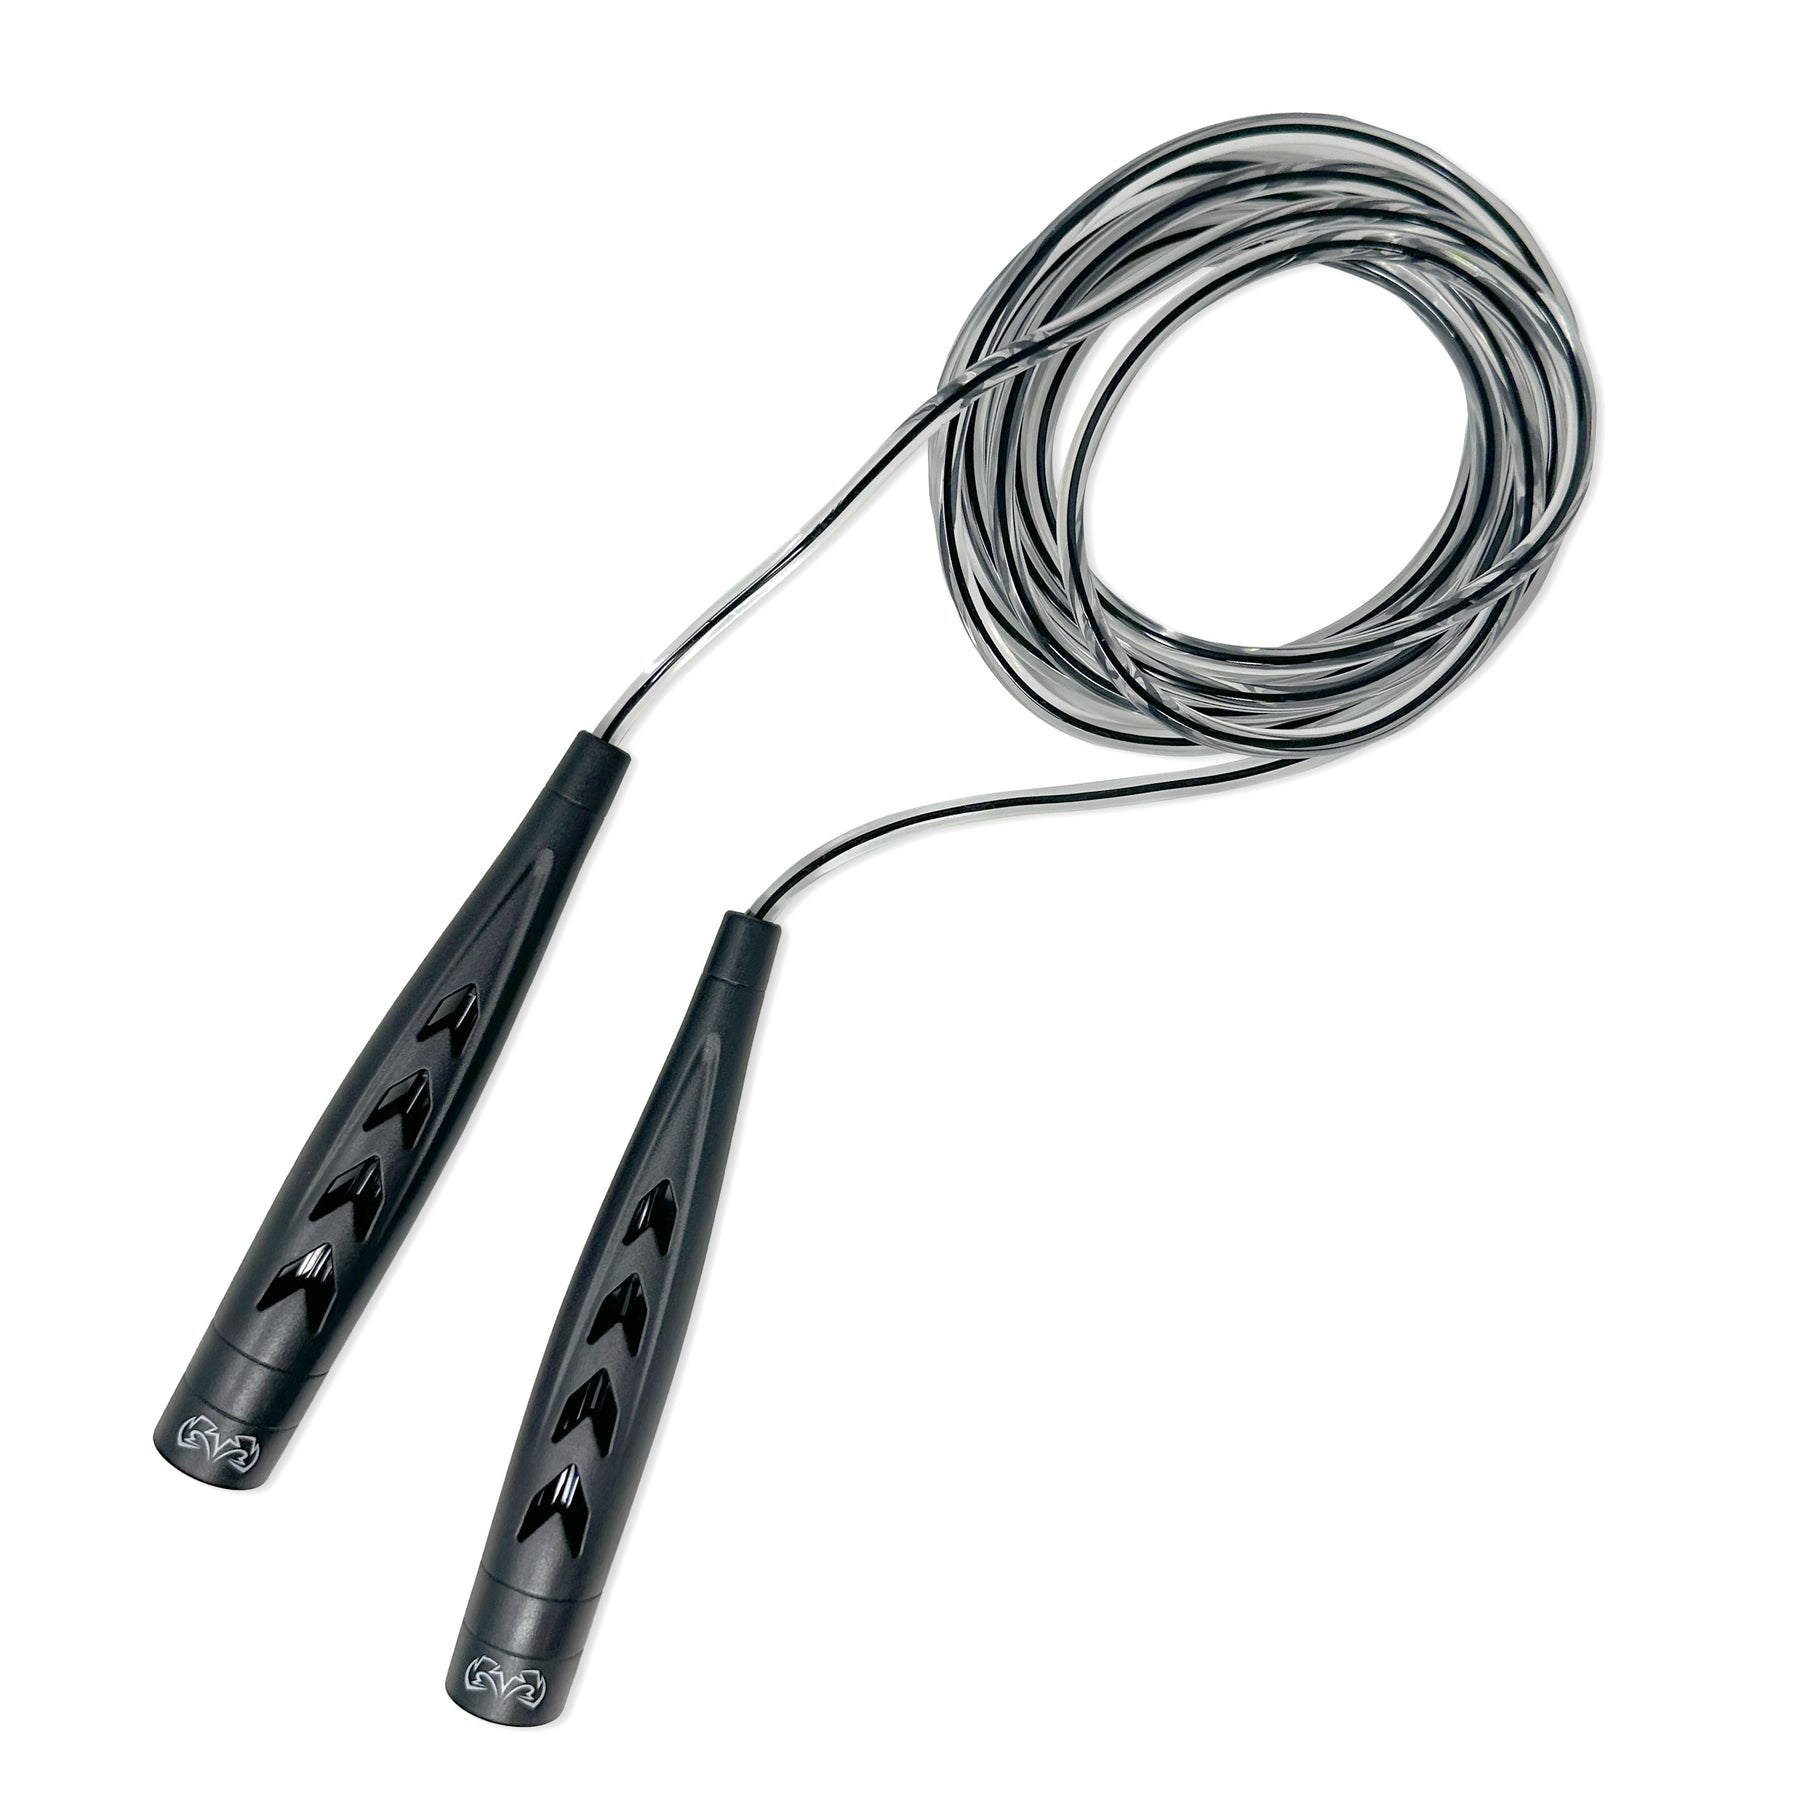 Aero Speed Jump Rope - New & Improved with Adjustable Cable Cord